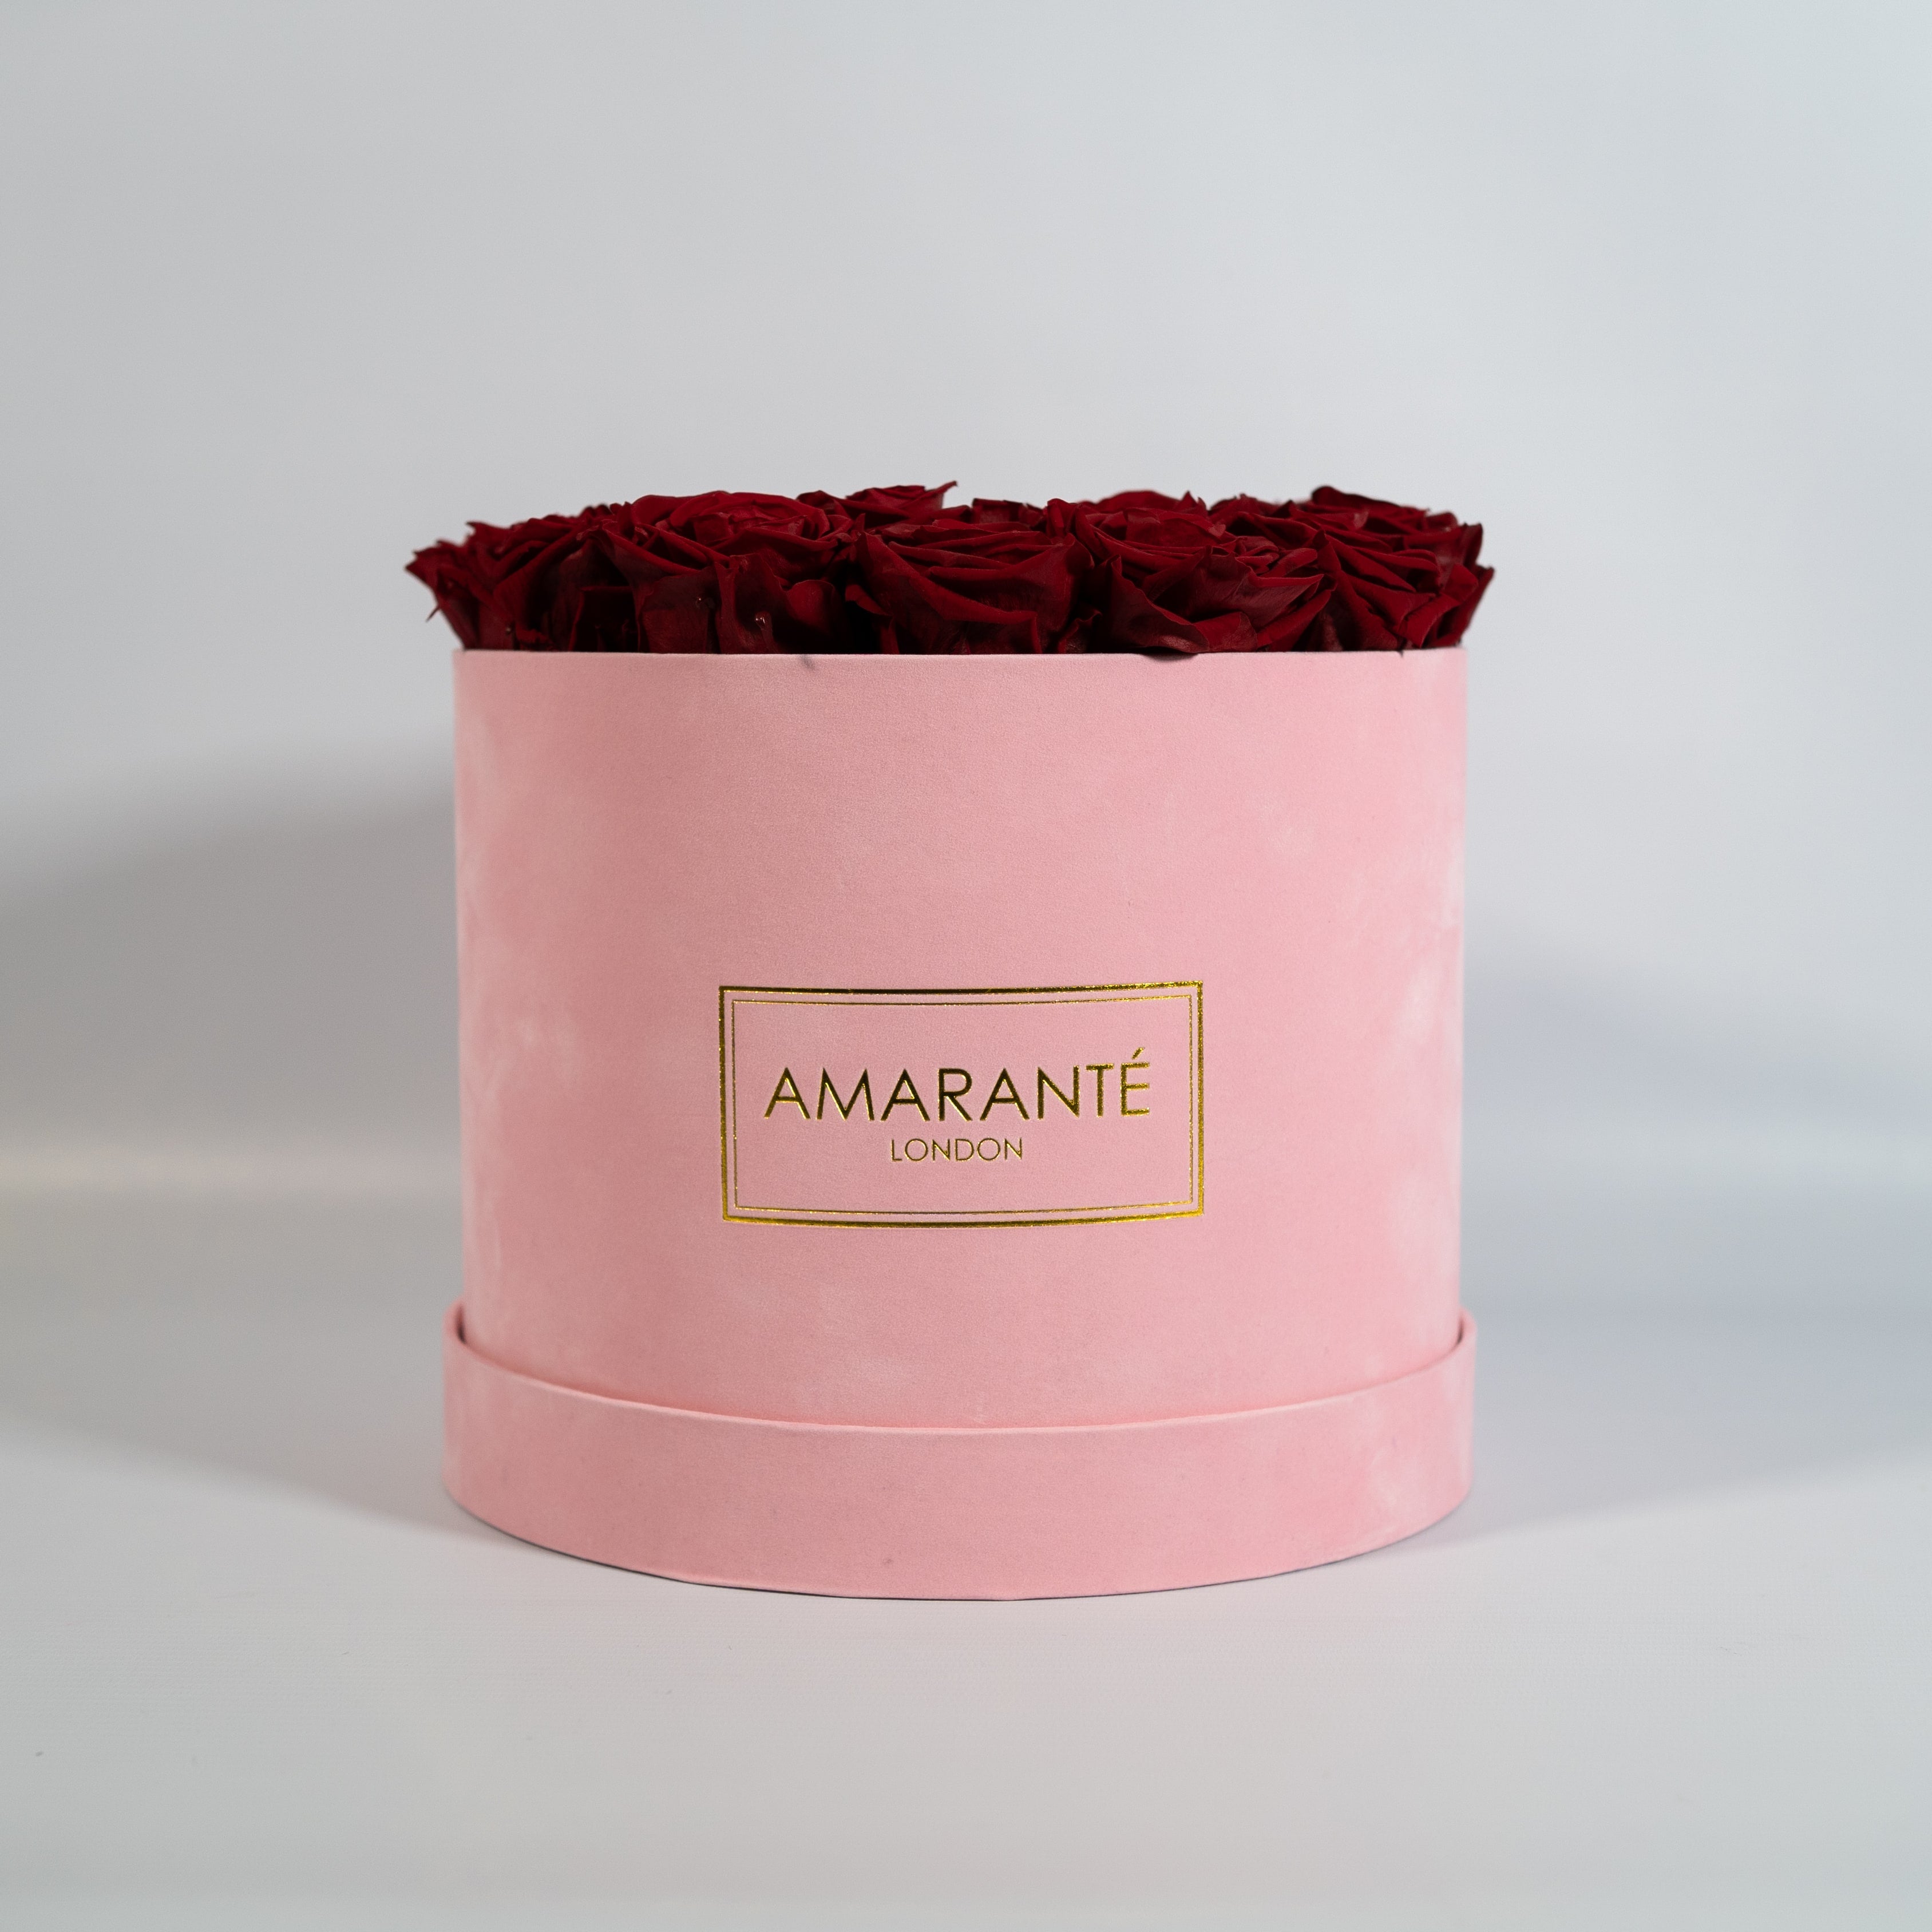 Divine wine Red Roses imbedded in a trendy pink box 